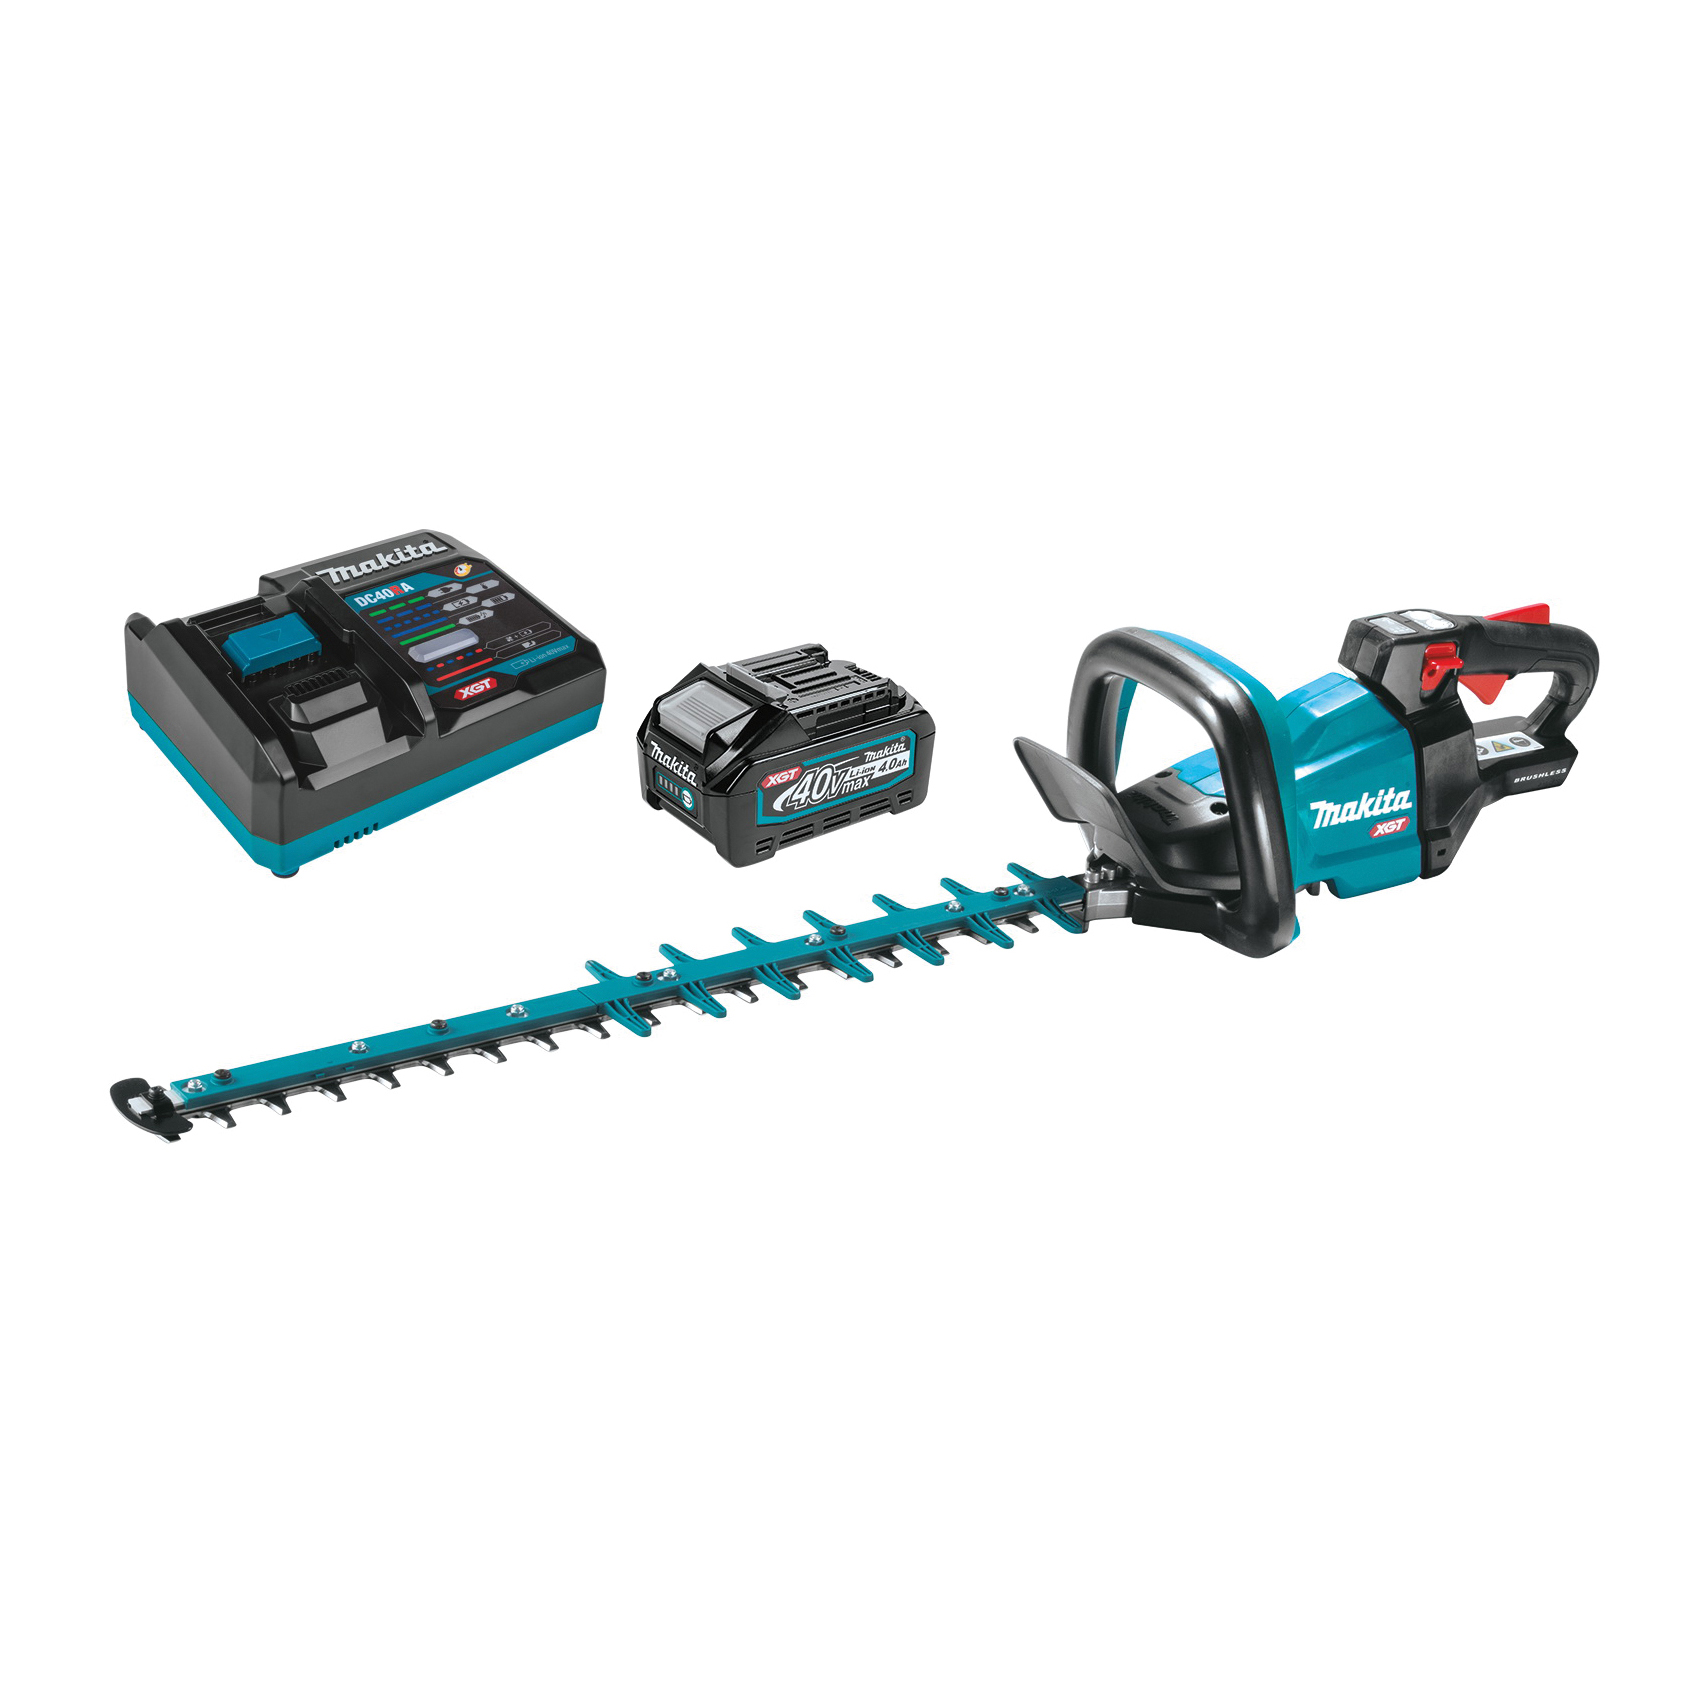 Makita XGT Series GHU02M1 Hedge Trimmer Kit, Battery Included, 4 Ah, 40 V, Lithium-Ion, 3/8 in Cutting Capacity